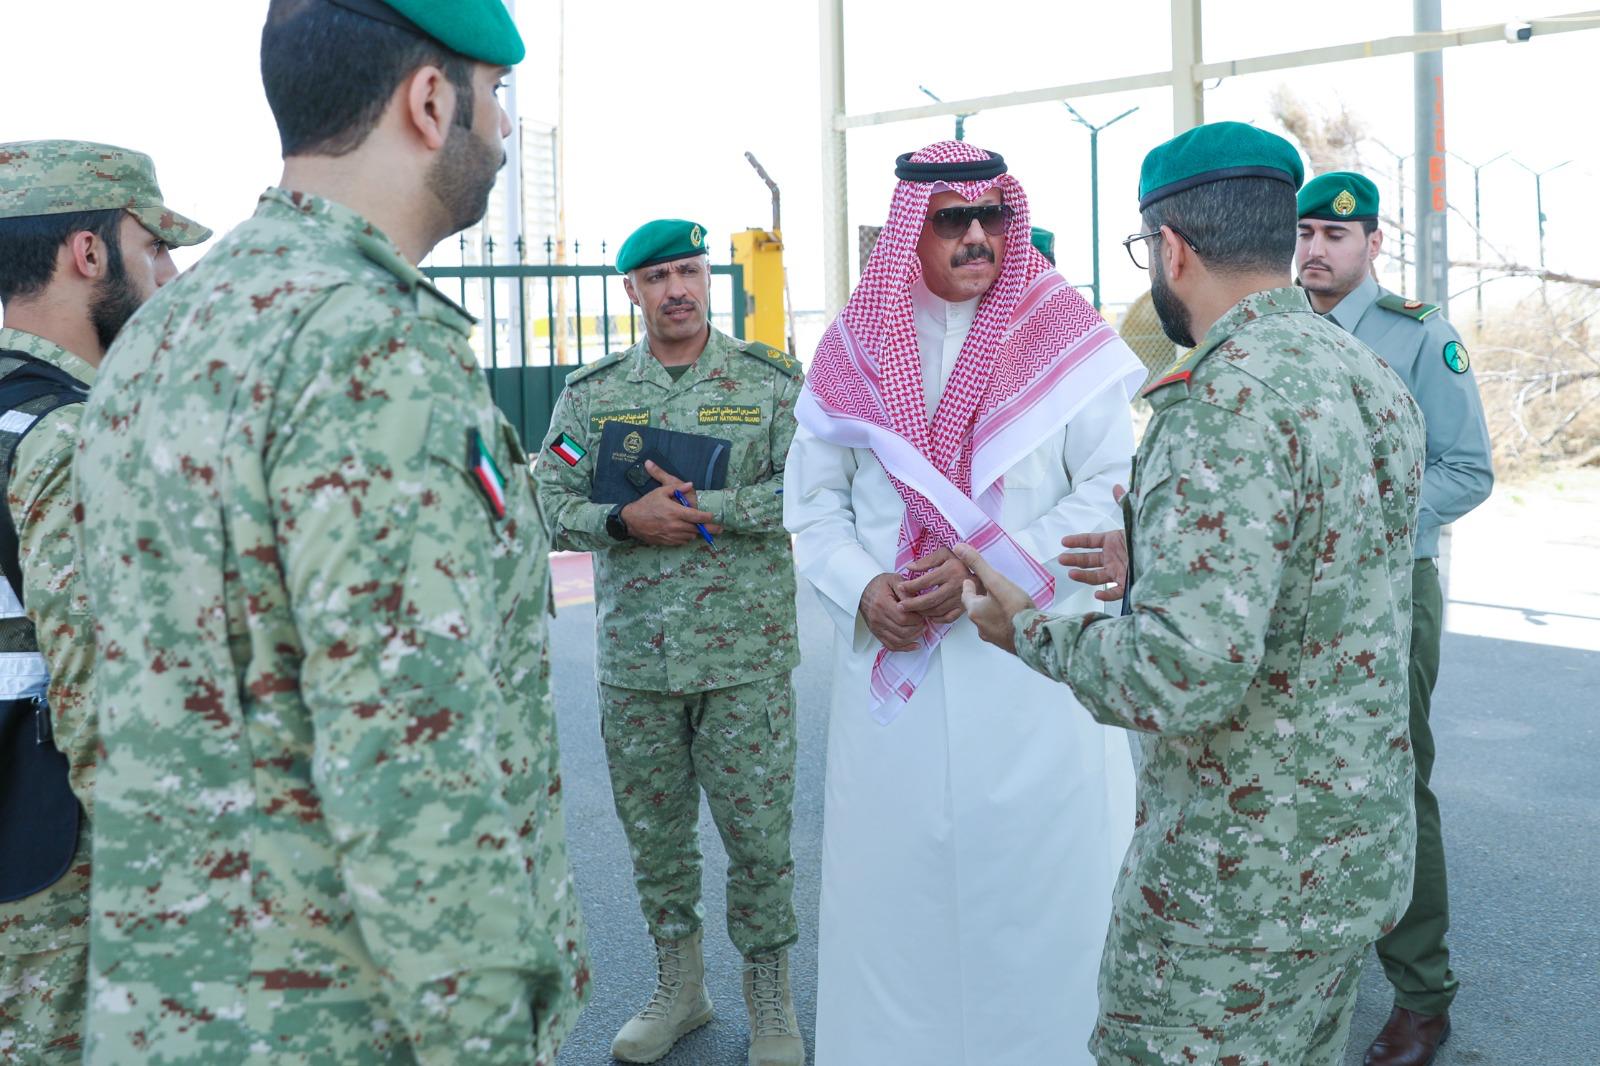 Deputy Chief of the National Guard during a visit to the Kabd relay station which is guarded by the National Guard